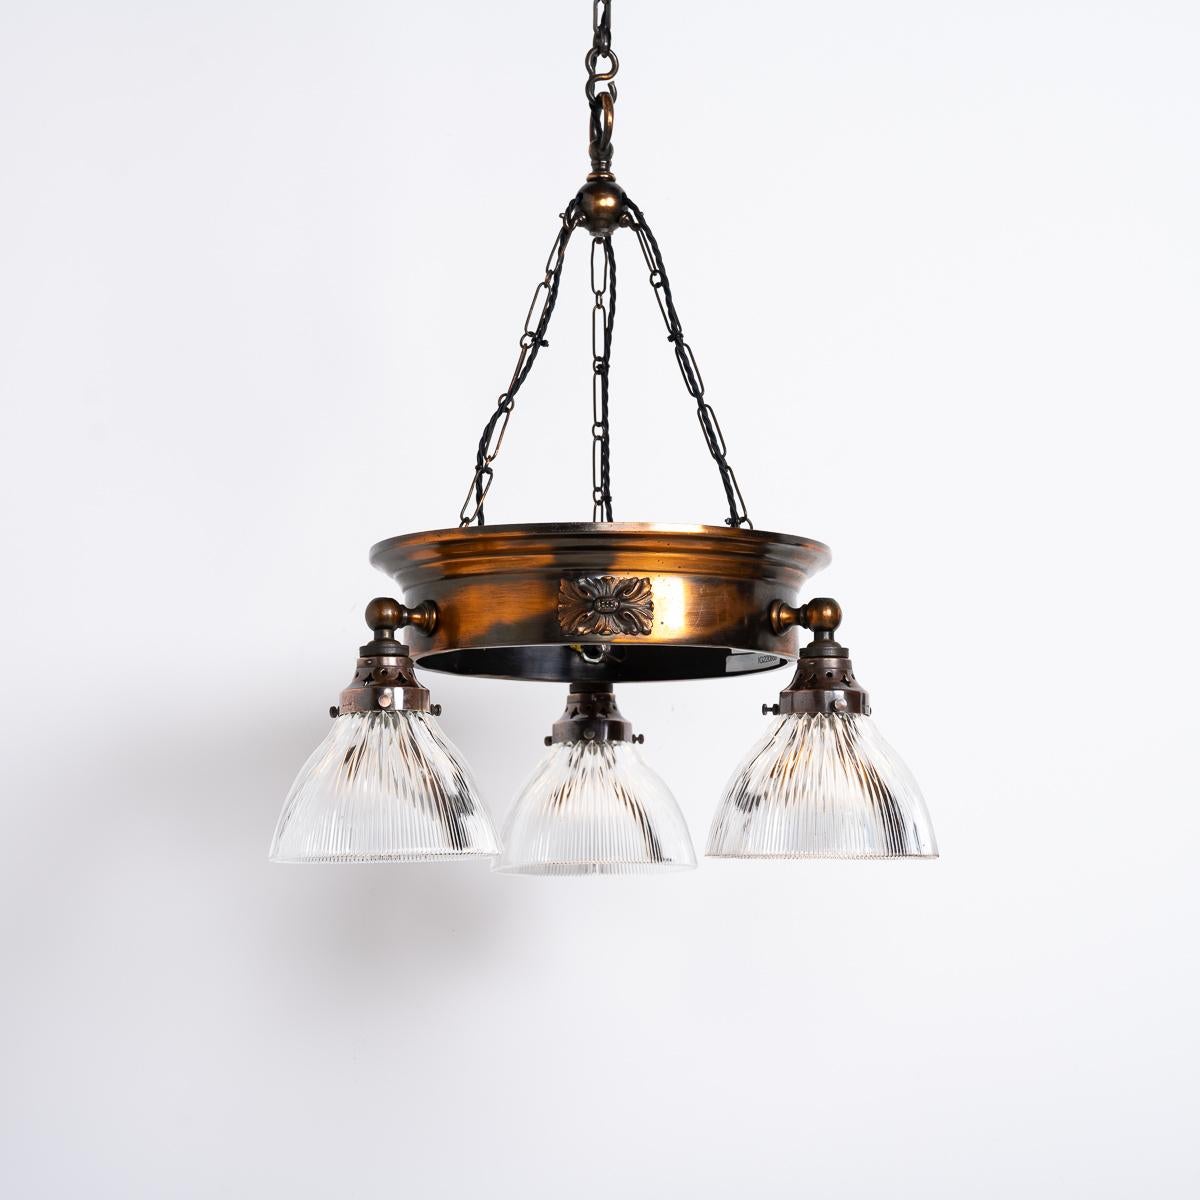 Early 20th Century Antique Copper Ring Chandelier With Prismatic Holophane Glass Shades By Gec For Sale